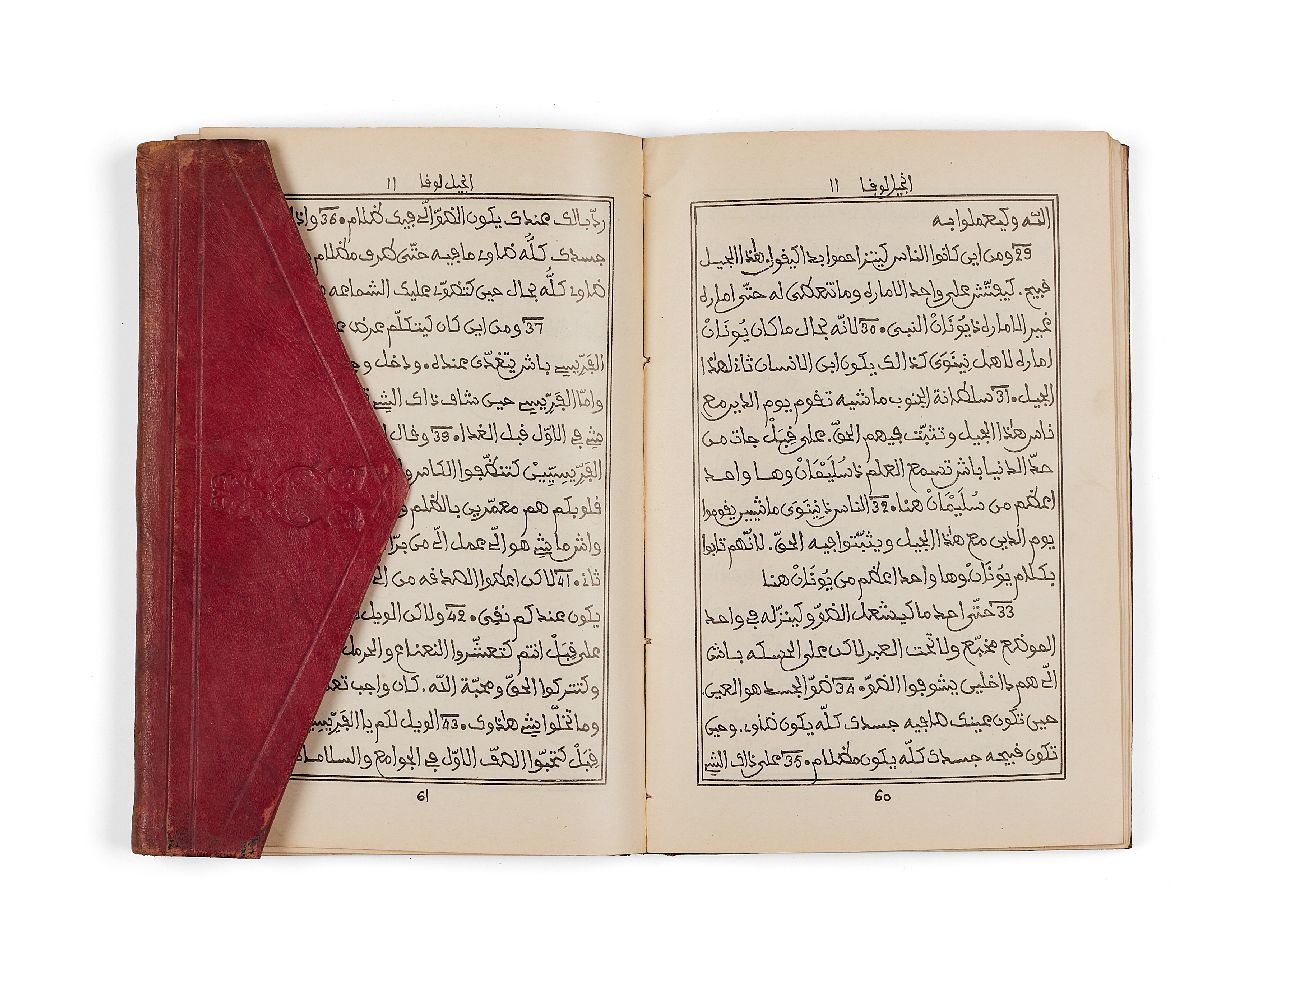 Ɵ The Gospel of Luke, in Arabic, lithographed on paper [Mequinez, Morocco, Gospel Missionary Union